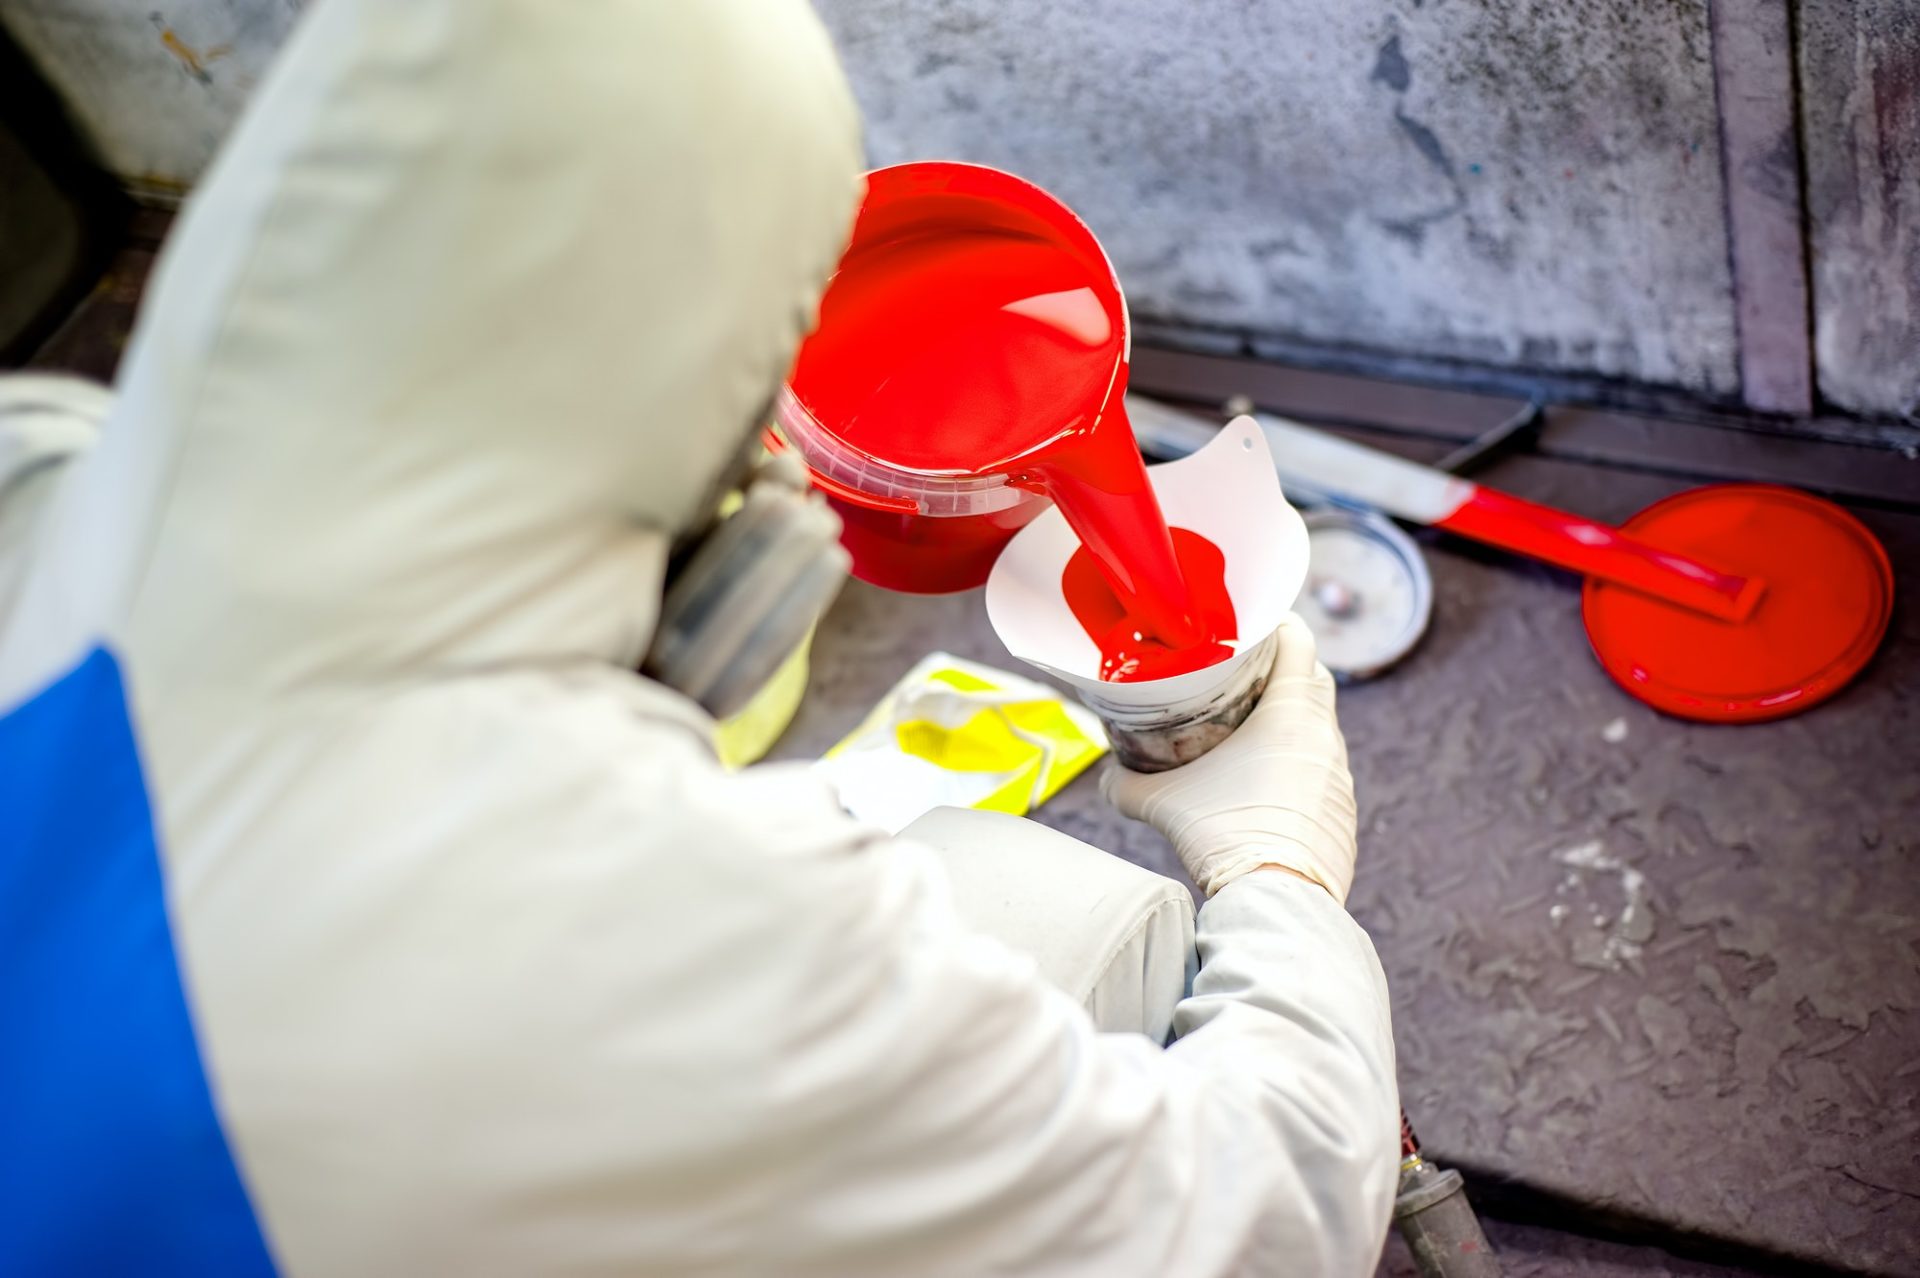 Auto mechanic mixing and pouring red paint for spraying and painting cars